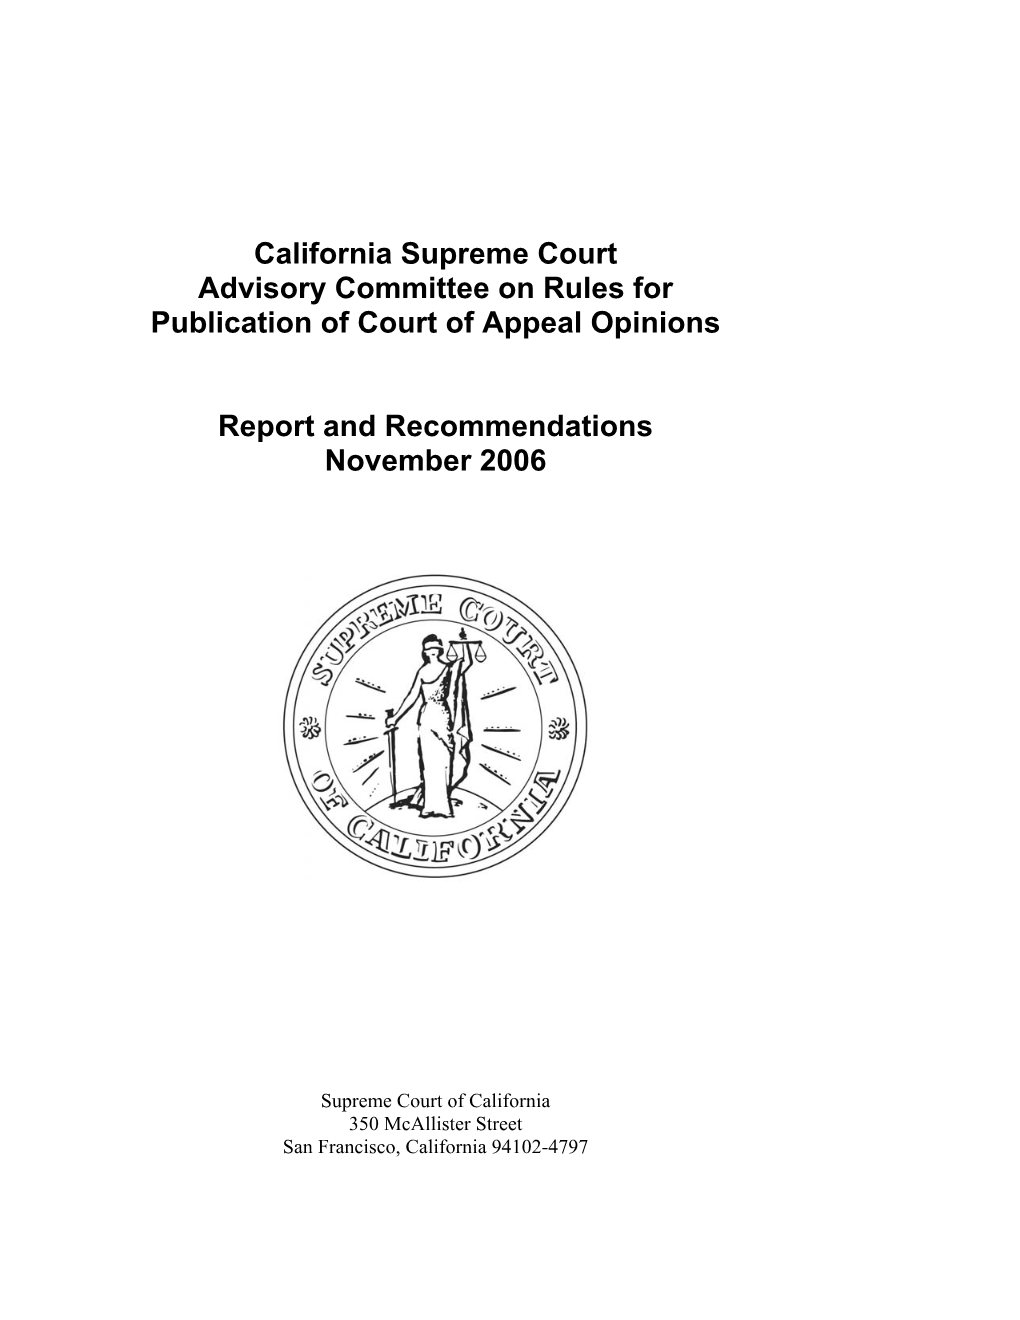 California Supreme Court Advisory Committee on Rules for Publication of Court of Appeal Opinions Report and Recommendations November 2006